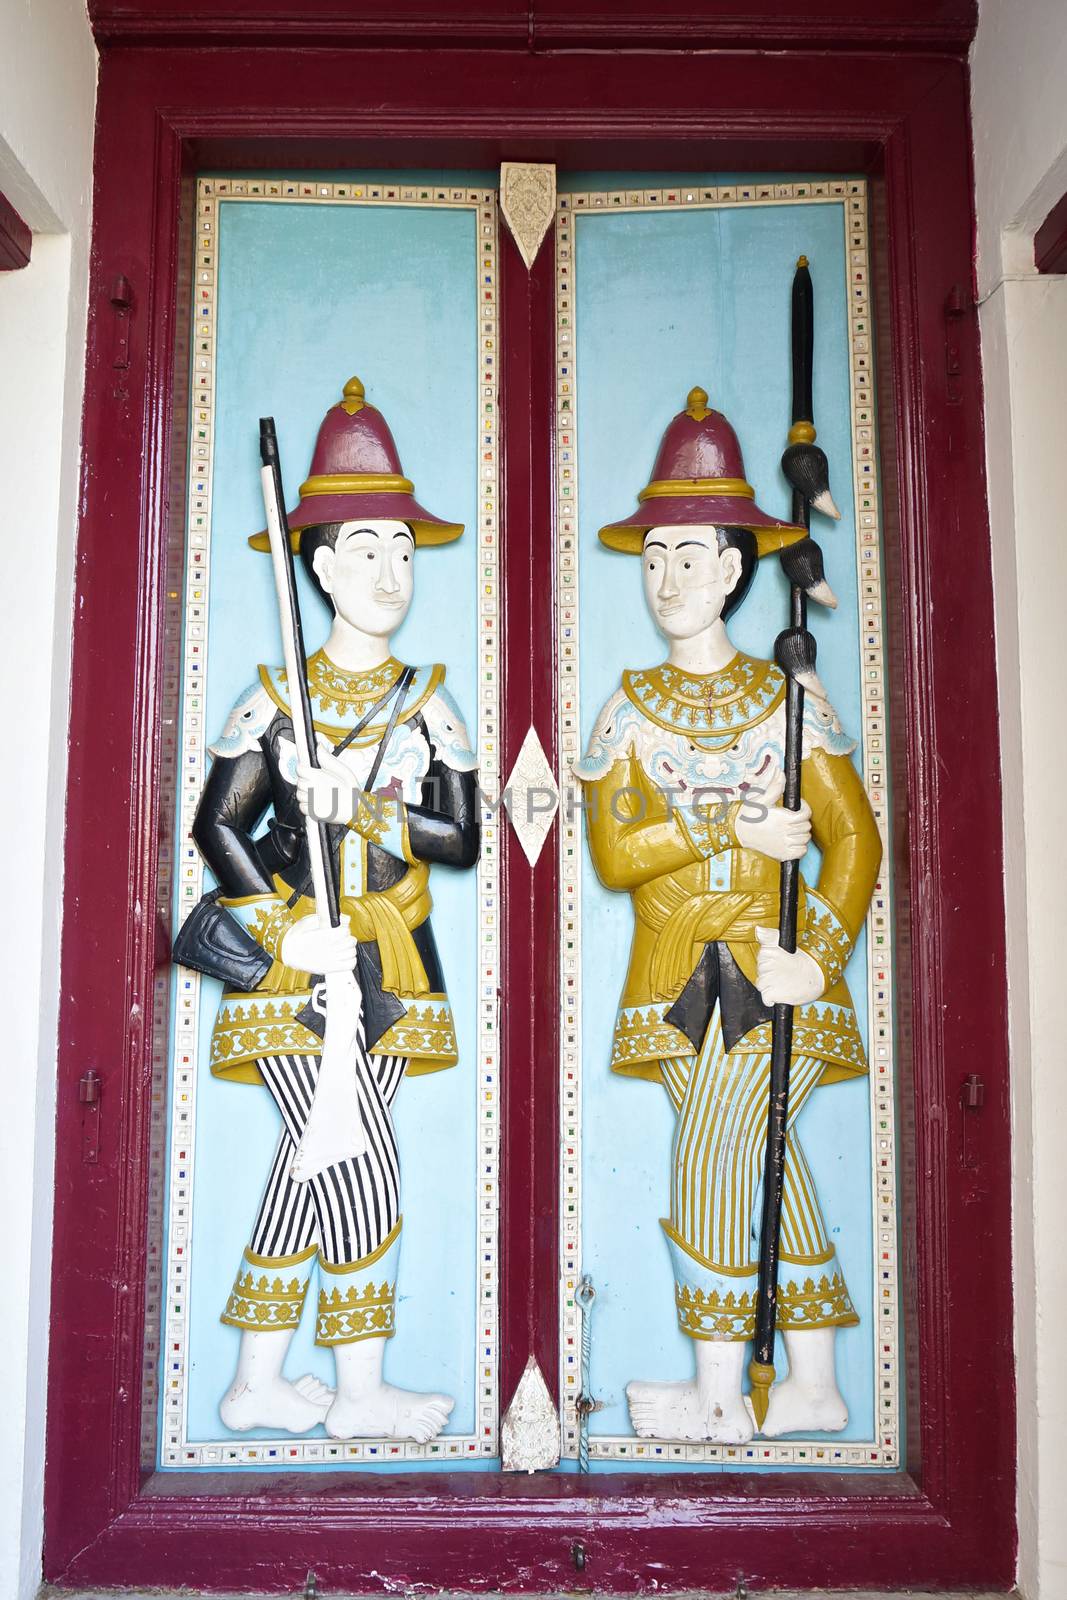 Soldier hold gun and spear on door of the building, which is located on the Temple of the Emerald Buddha.